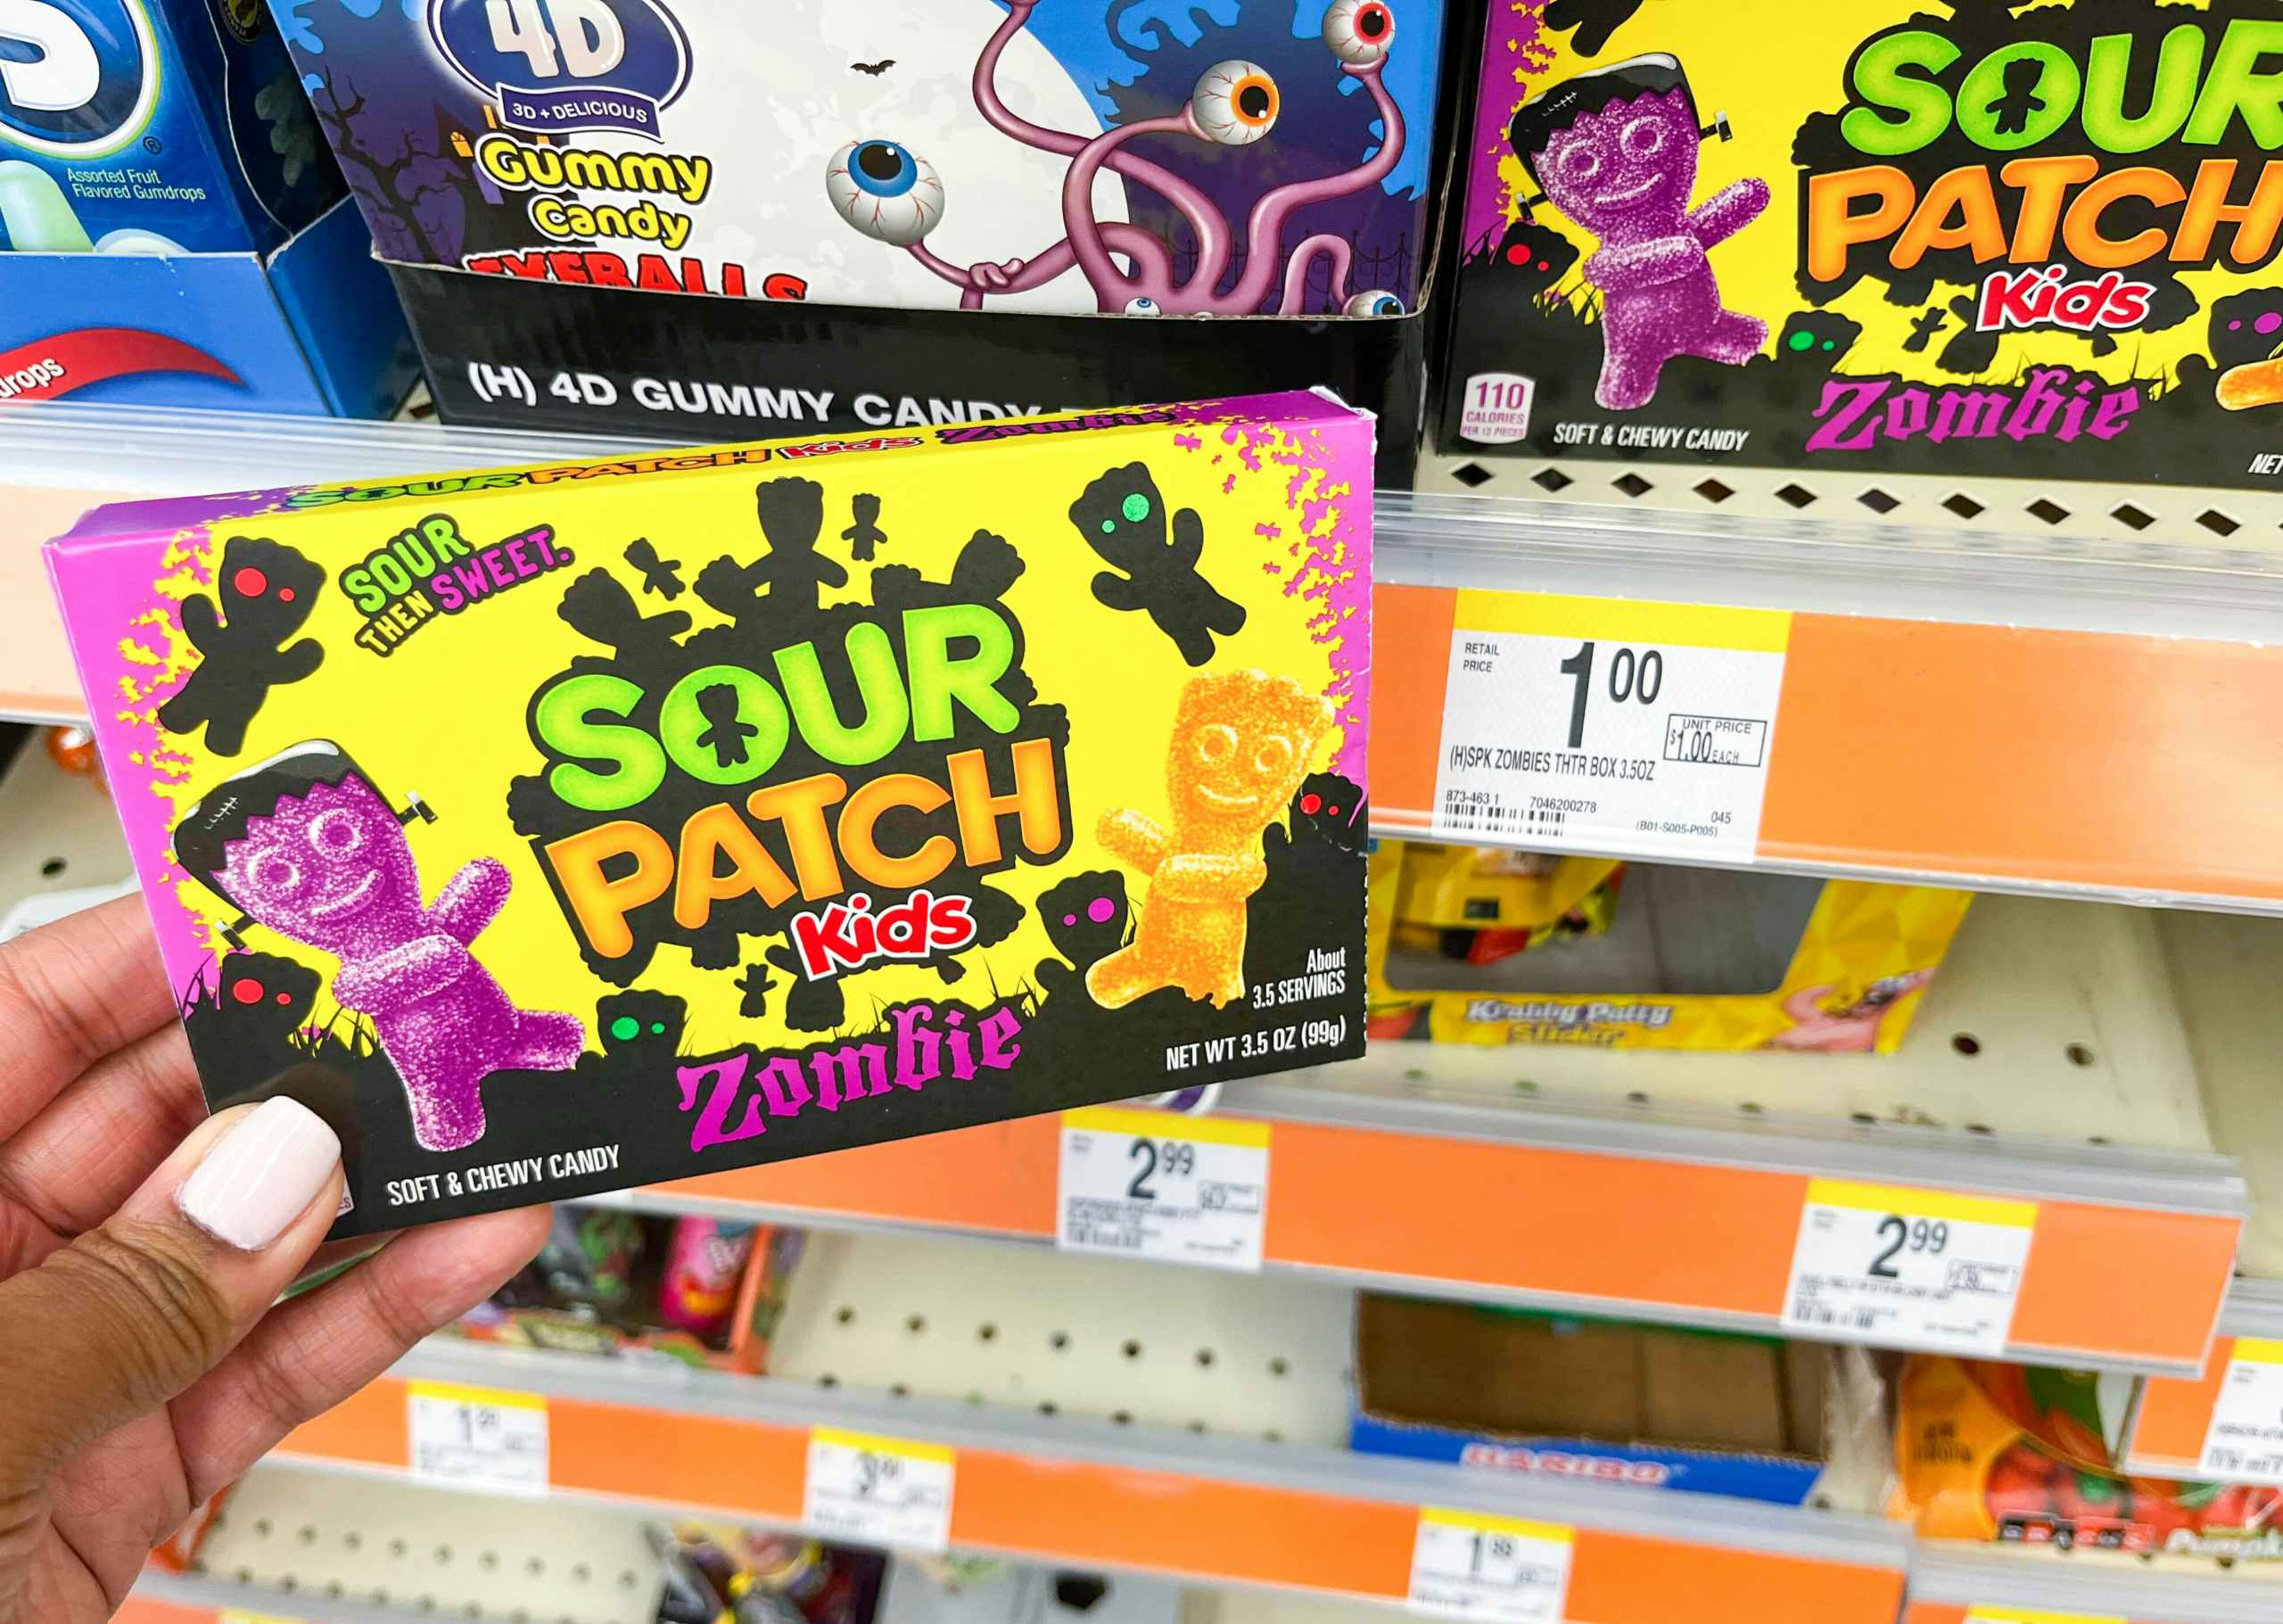 box of Sour Patch Kids Zombies in front of price tag